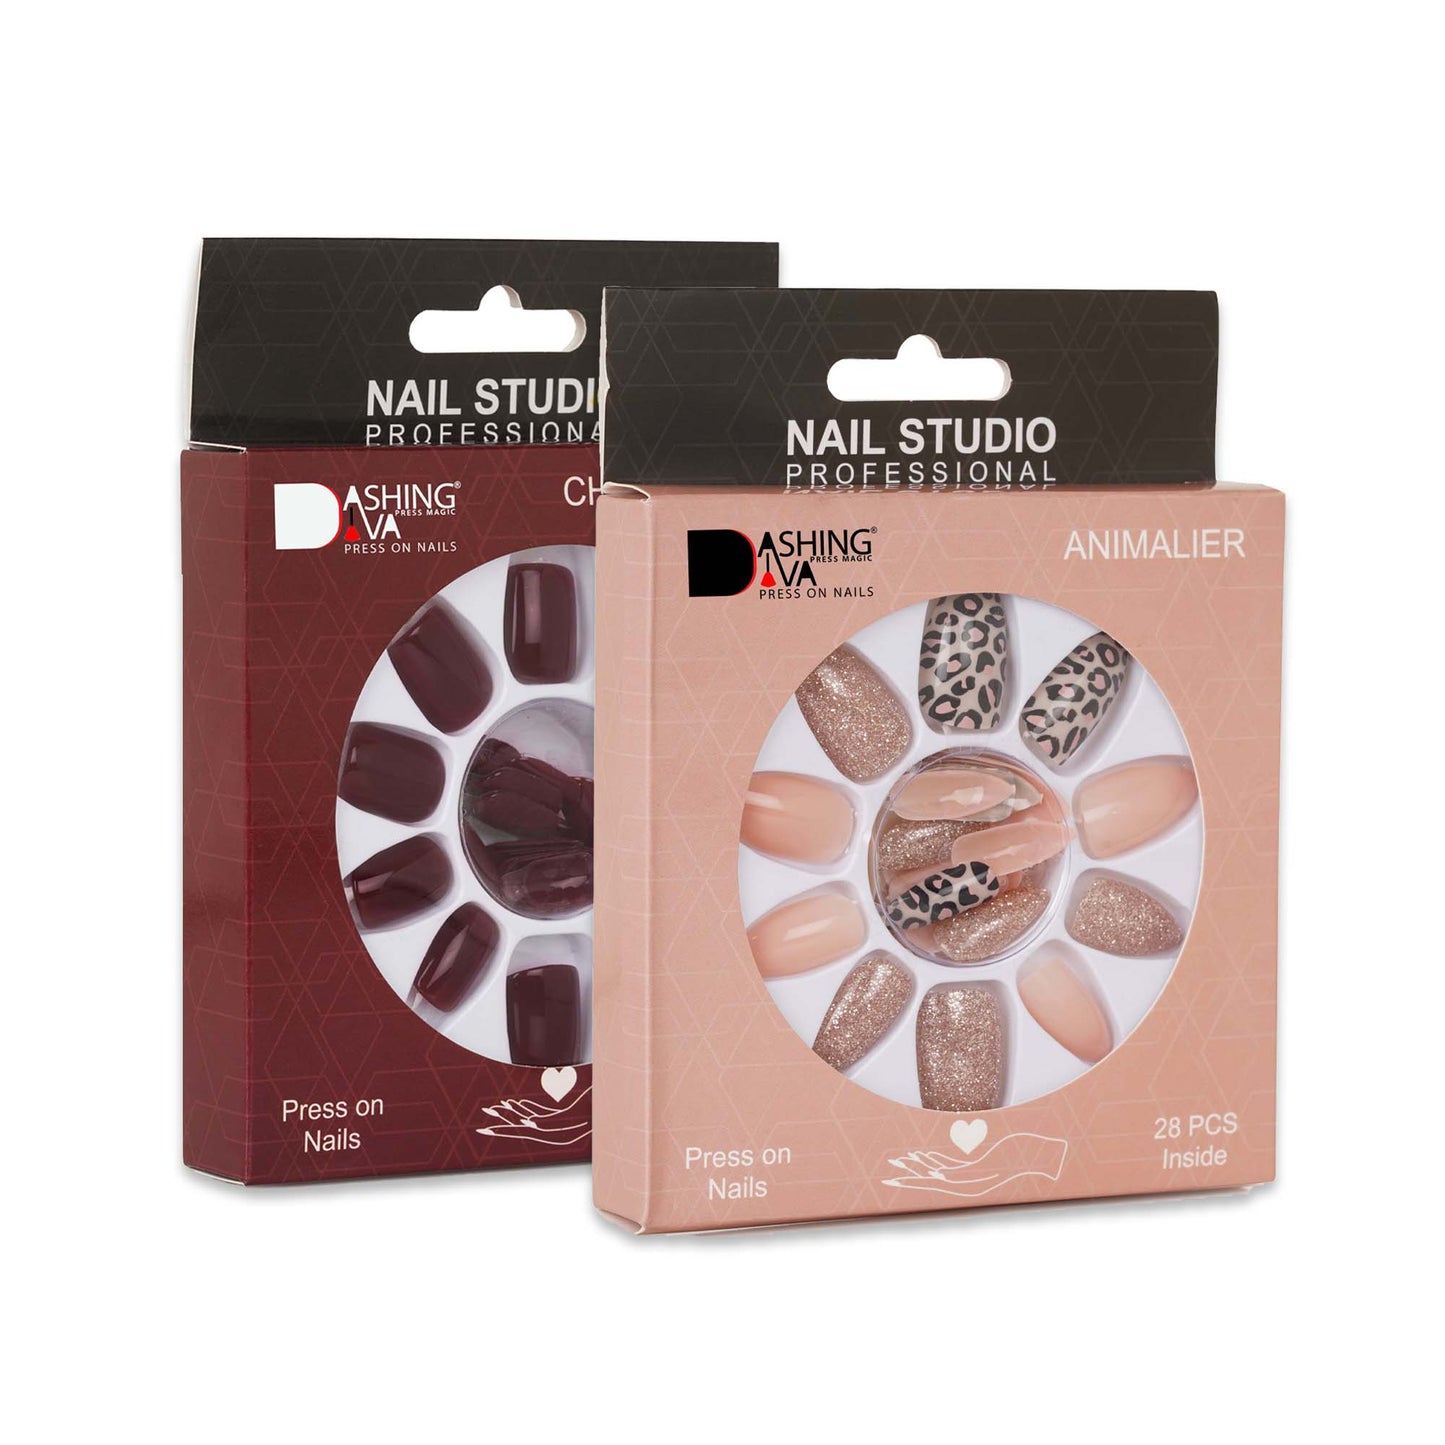 Stick On Nails | Dashing Diva Press Magic Cherry Wood, Animalier Reusable Artificial False Acrylic Press on Nails With Quick Dry Nail Glue, Pack of 2